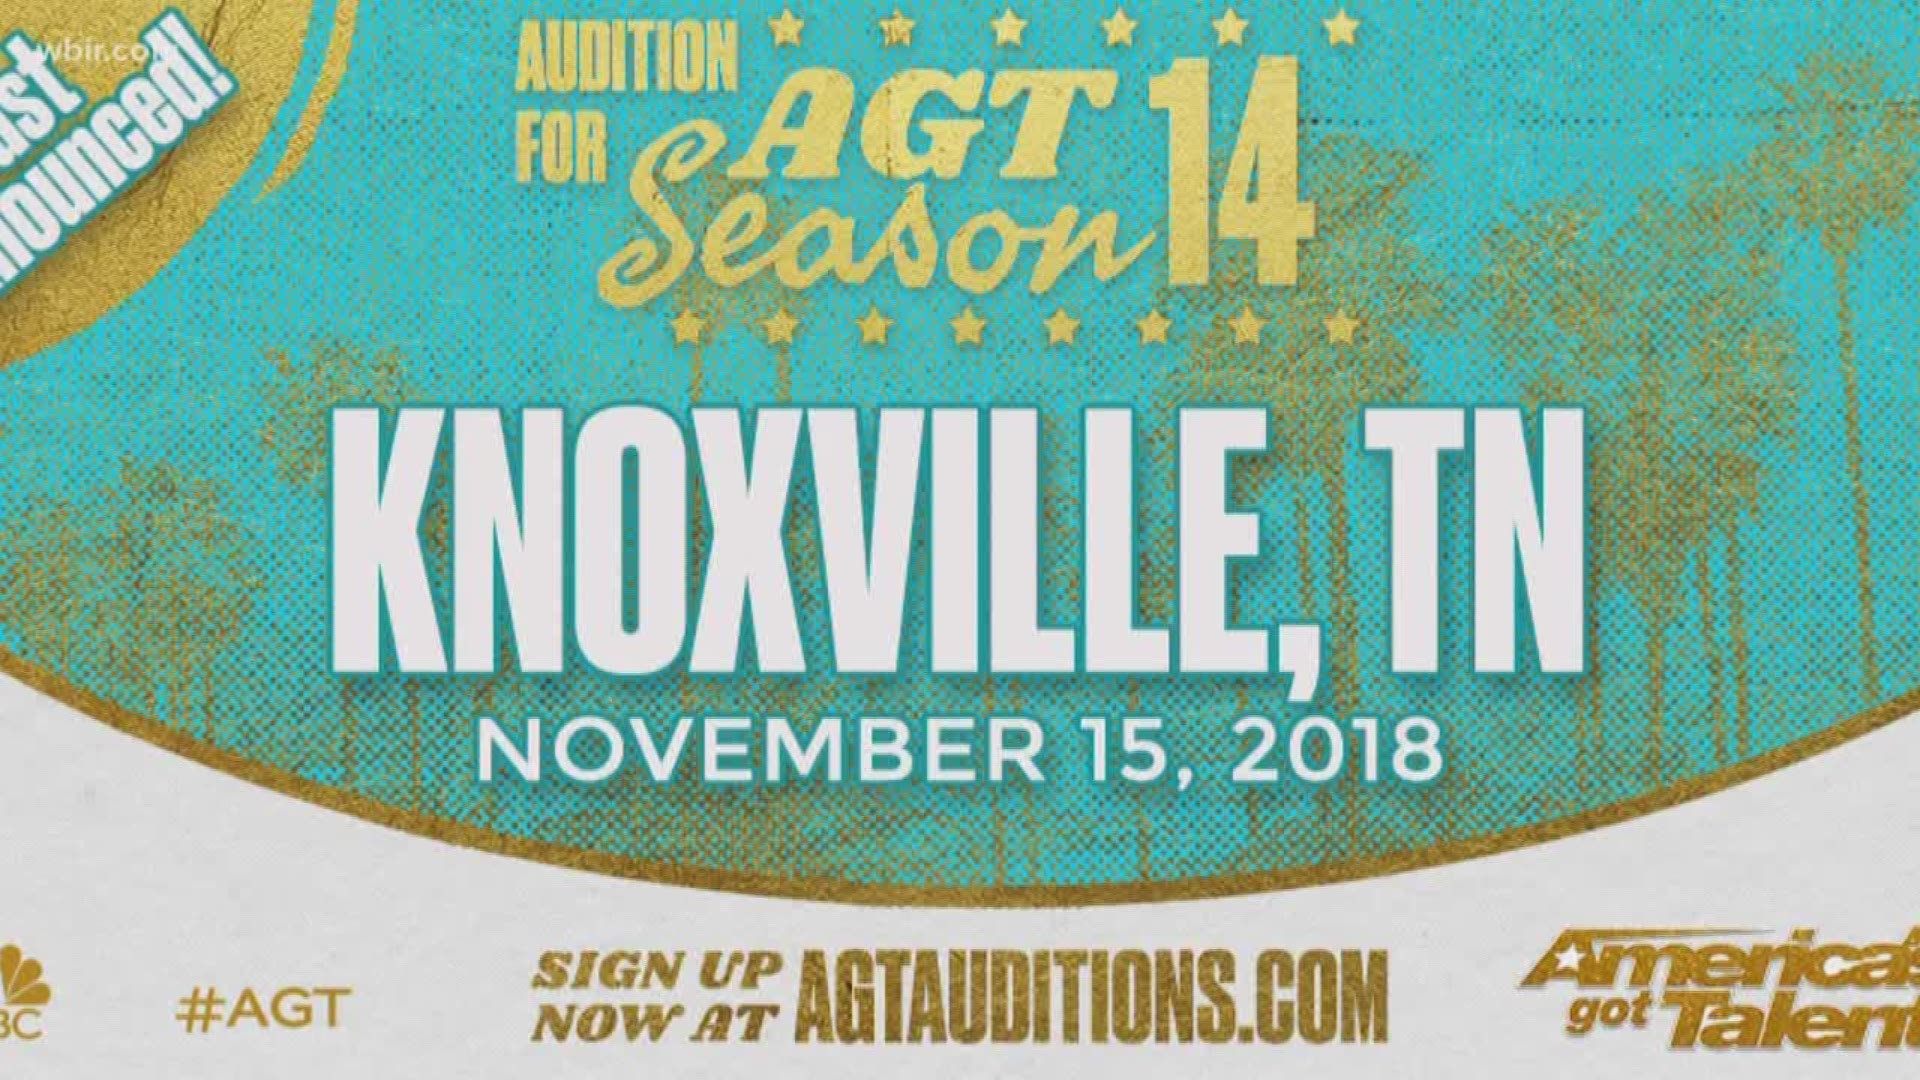 For the first time ever, NBC's "America's Got Talent" will host auditions in East Tennessee. The auditions are at the Knoxville Convention Center on Thursday, November 15,  2018. Doors open at 7am. You're encouraged to sign up at agtauditions.com and sub